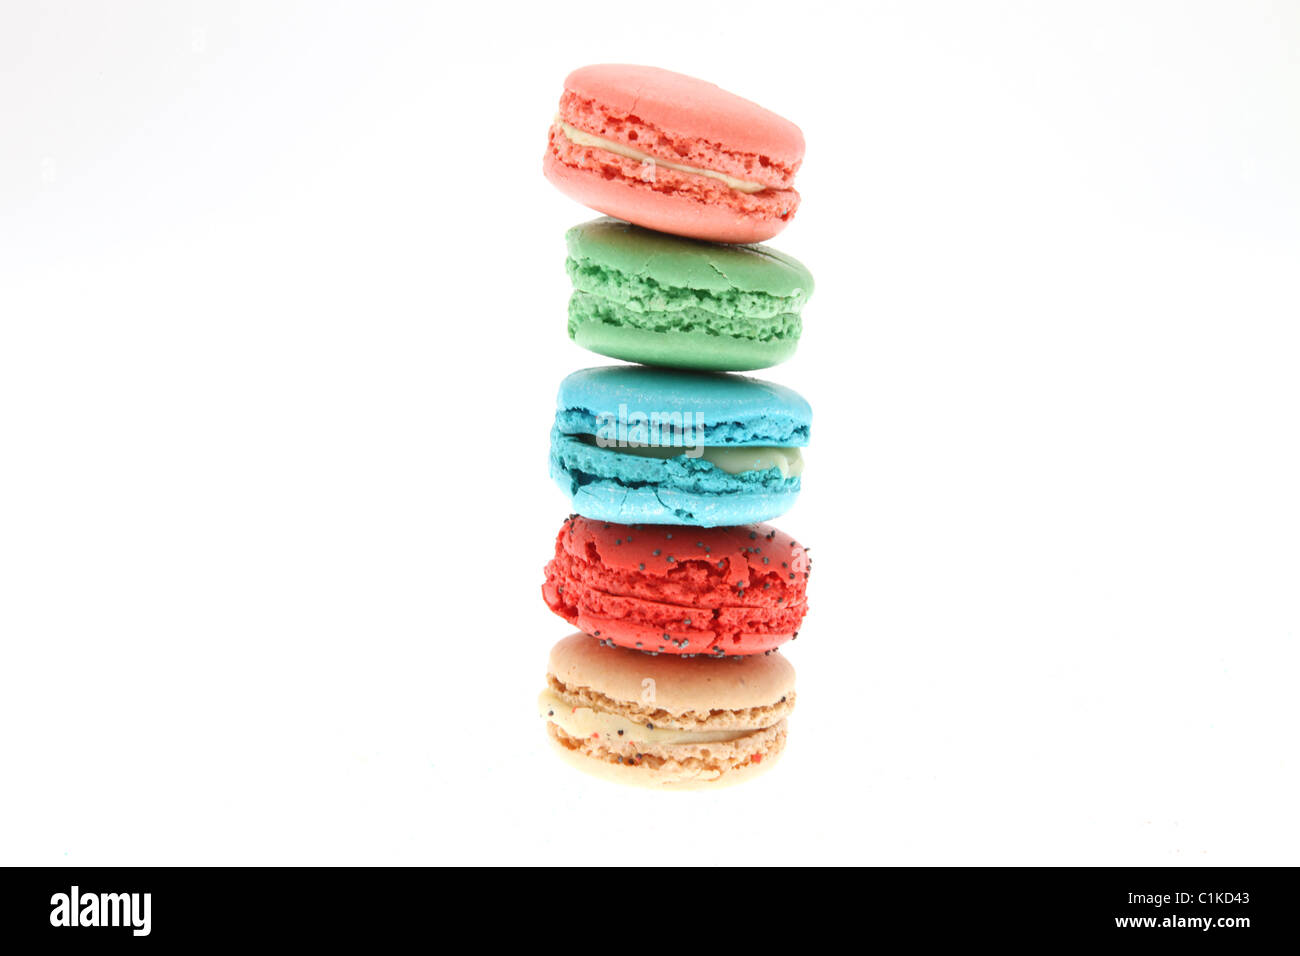 Colourful stack of macaroons with a white background Stock Photo